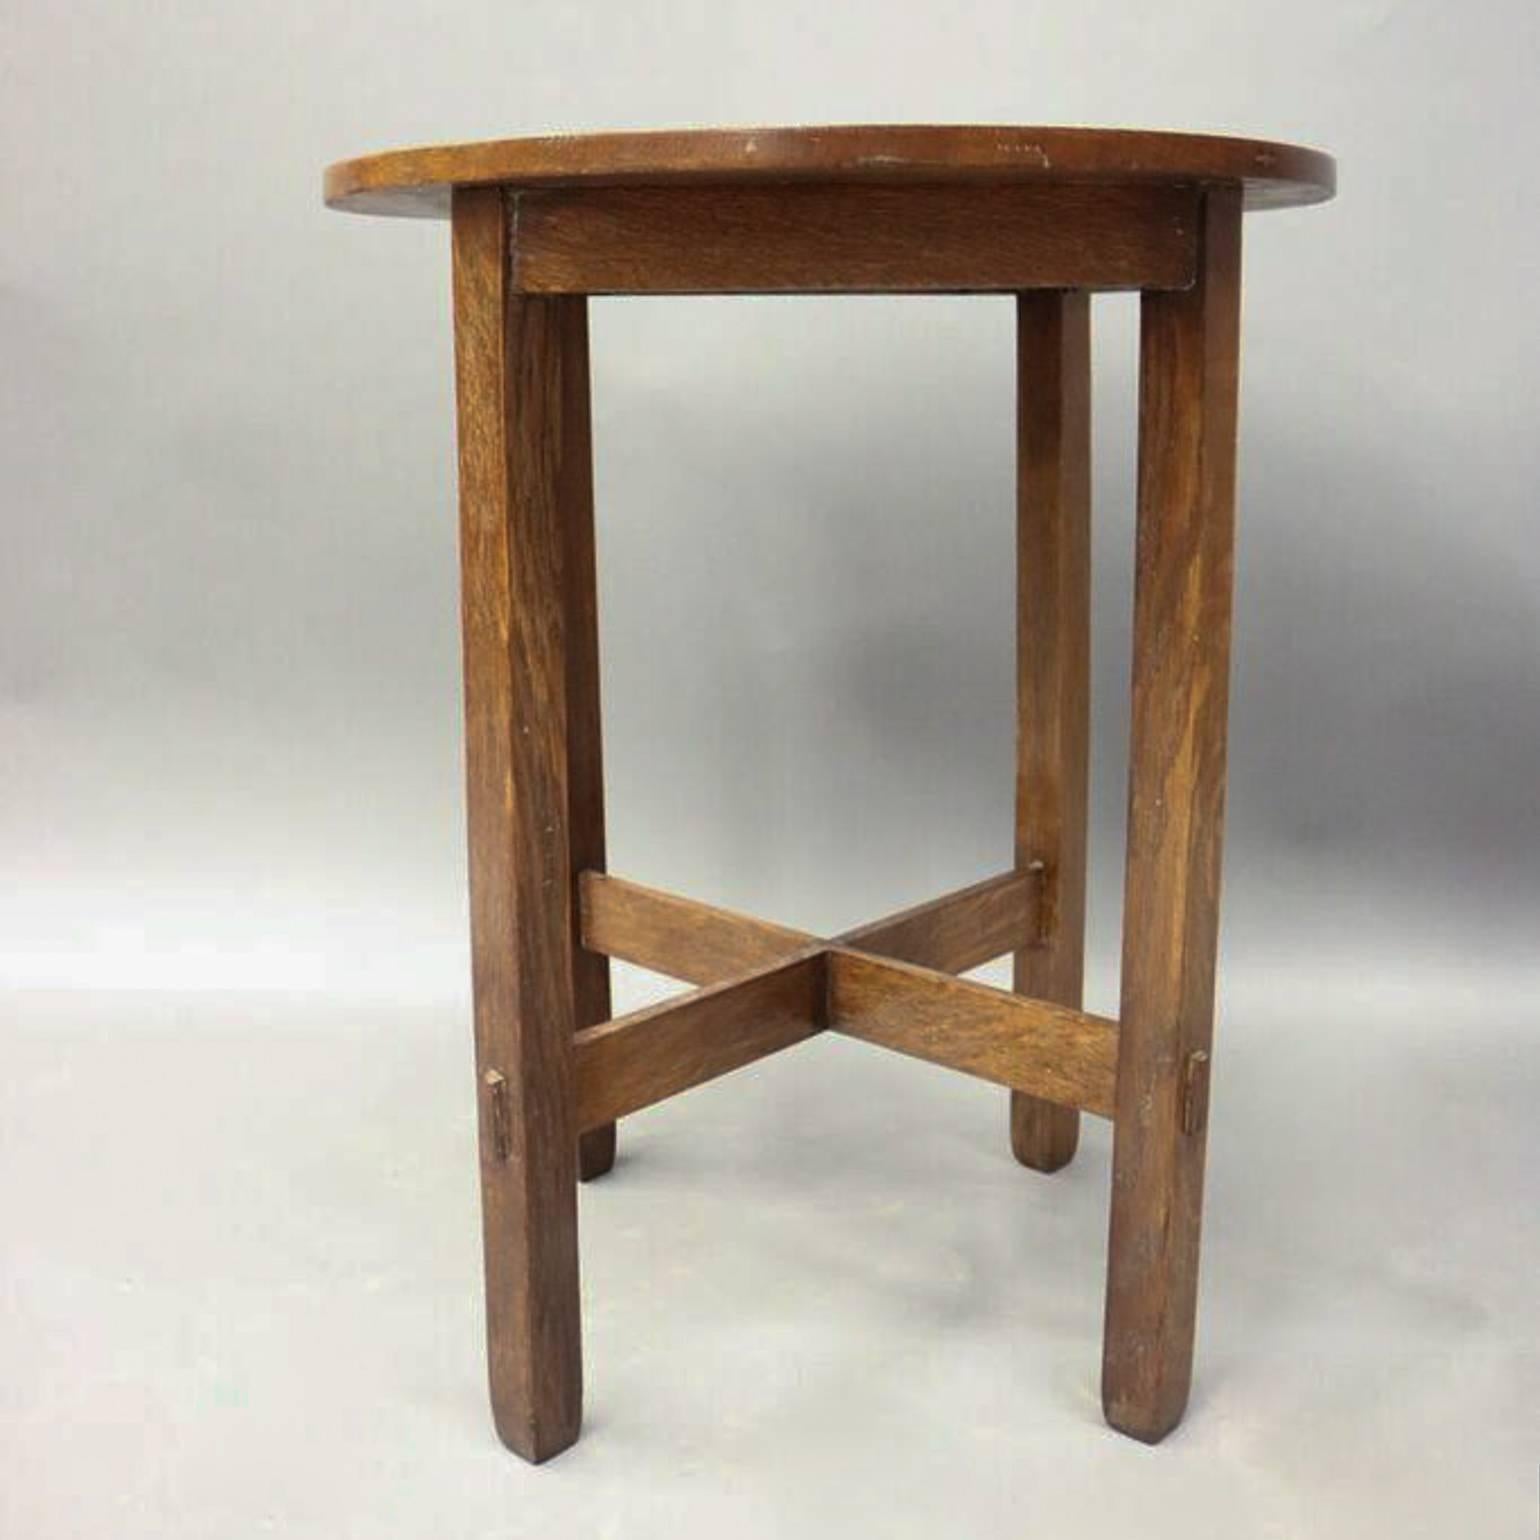 Antique Stickley Bros. Arts & Crafts Mission oak plant stand features the traditional simple and functional design with a round top above four legs connected by mortise and tenon cross stretchers, circa 1910

Measures: 29.5